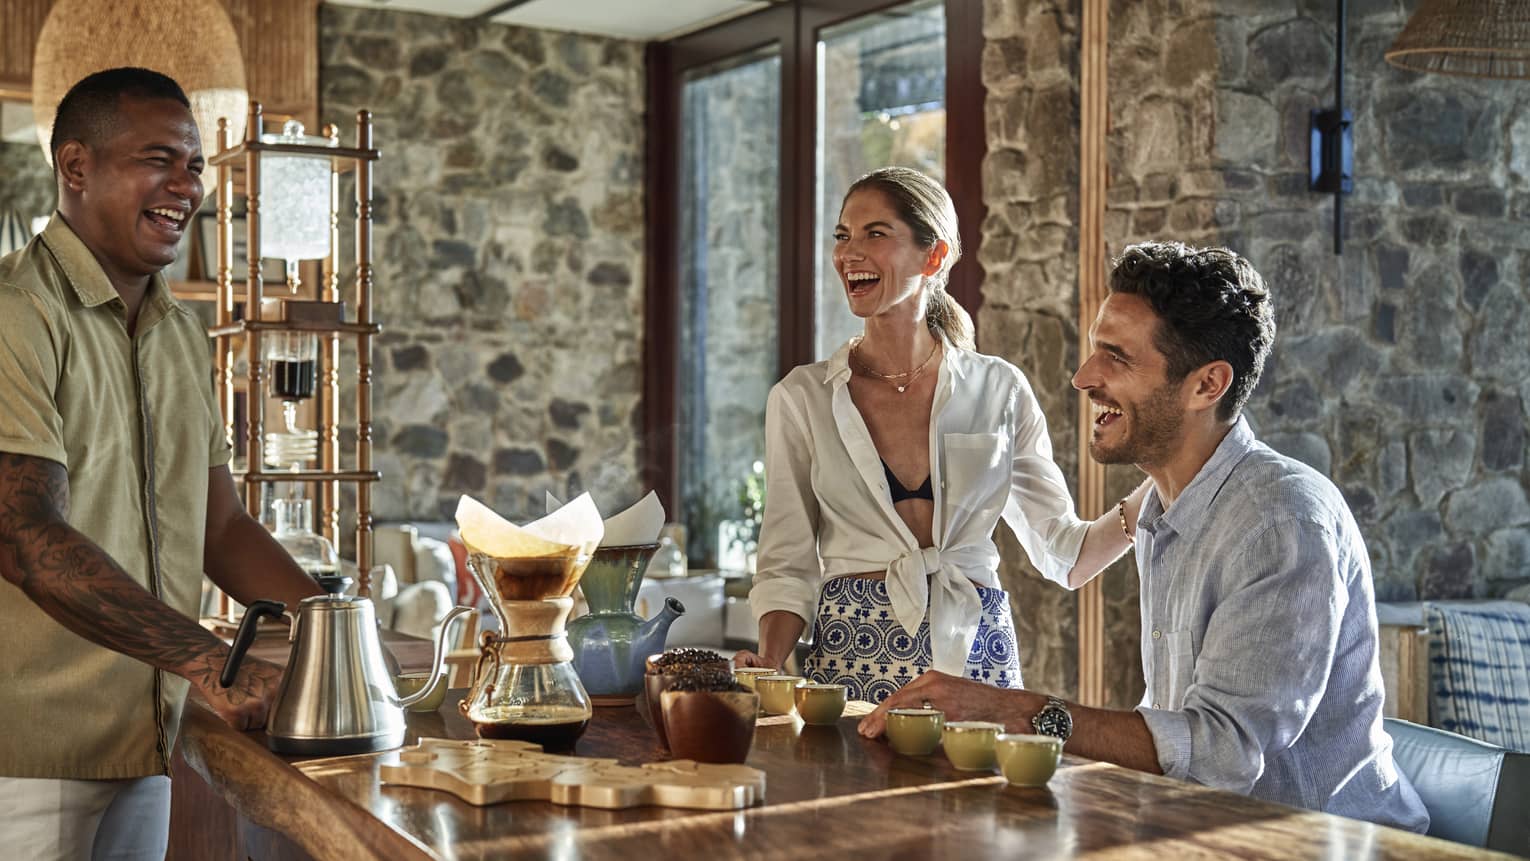 Carafes, cups of coffee and bowls of roasted coffee beans rest on a bar as two guests share a laugh with their bartender.